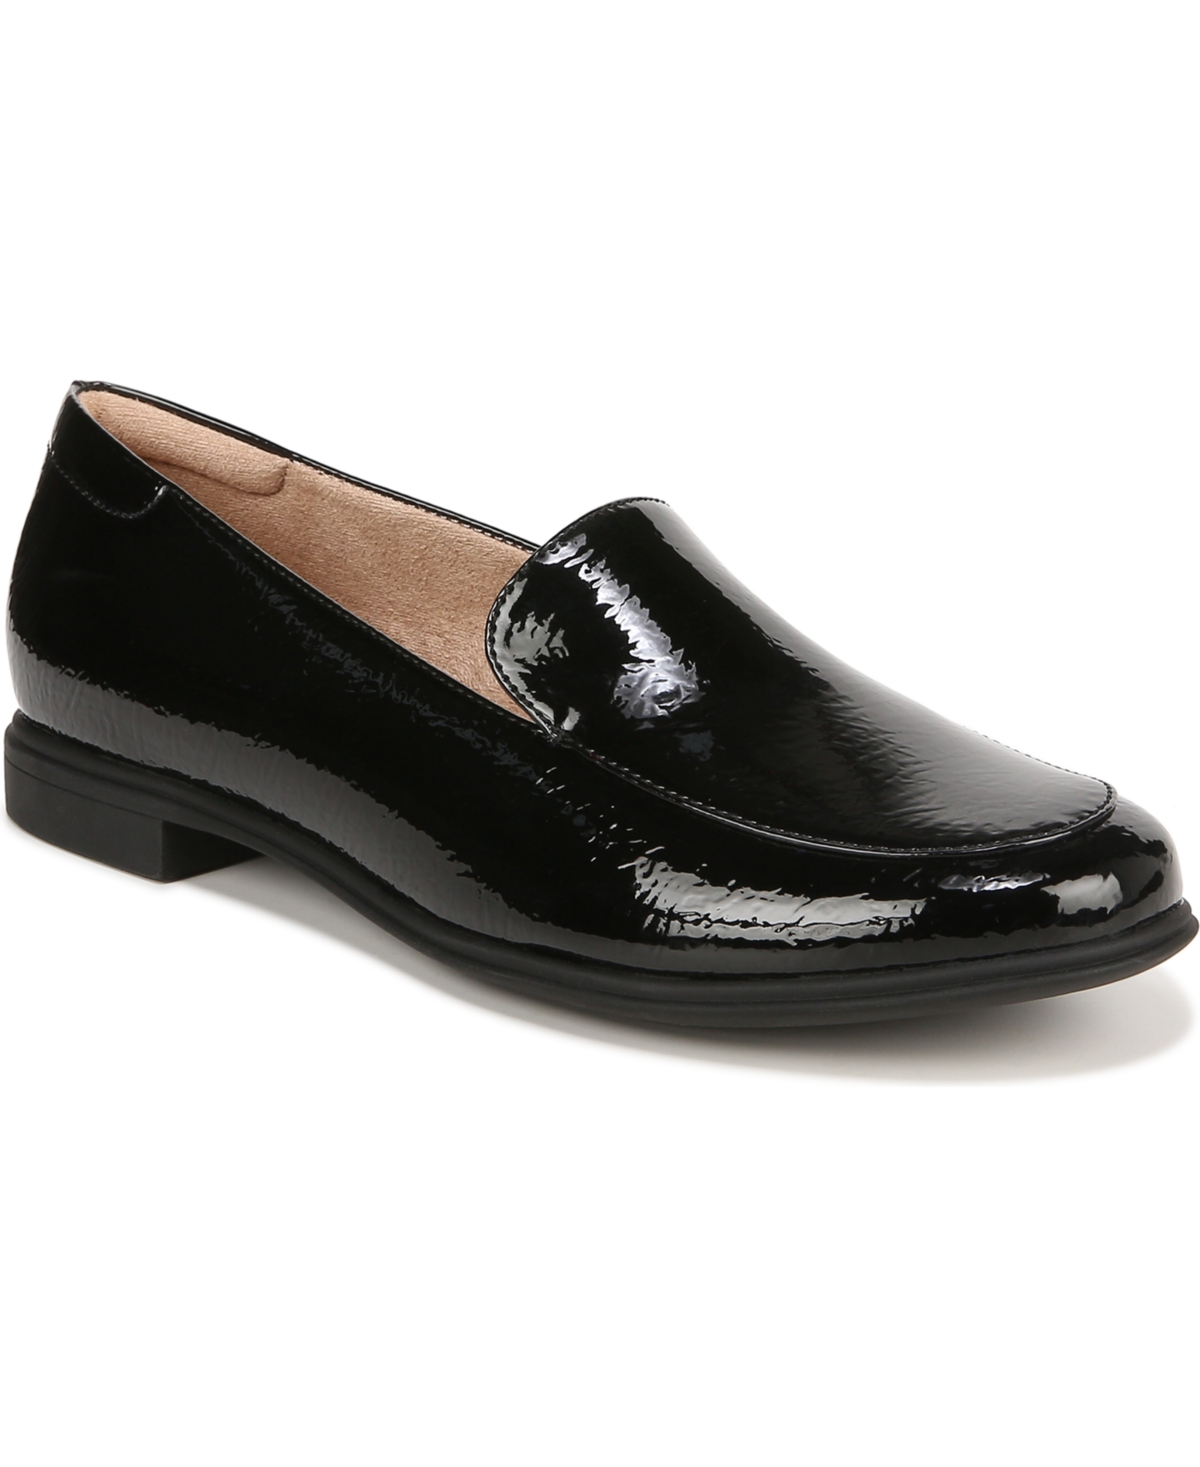 SOUL NATURALIZER LUV LOAFERS